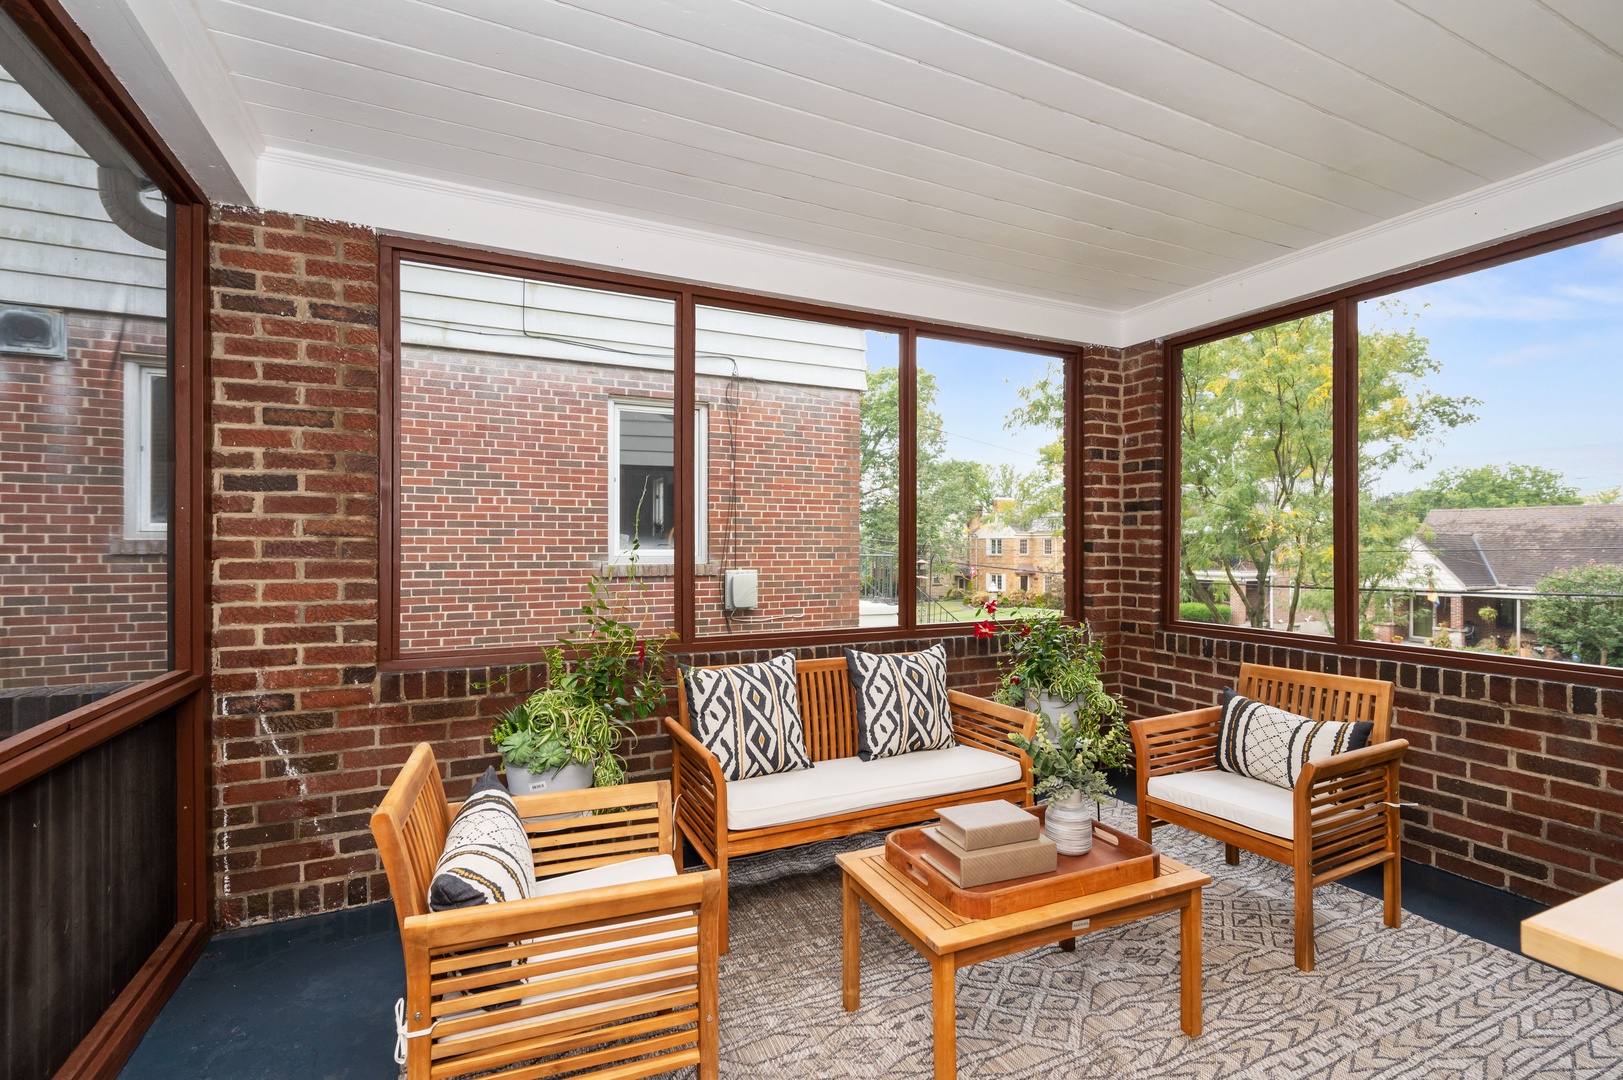 Lounge the day away in the fresh air on the enclosed porch